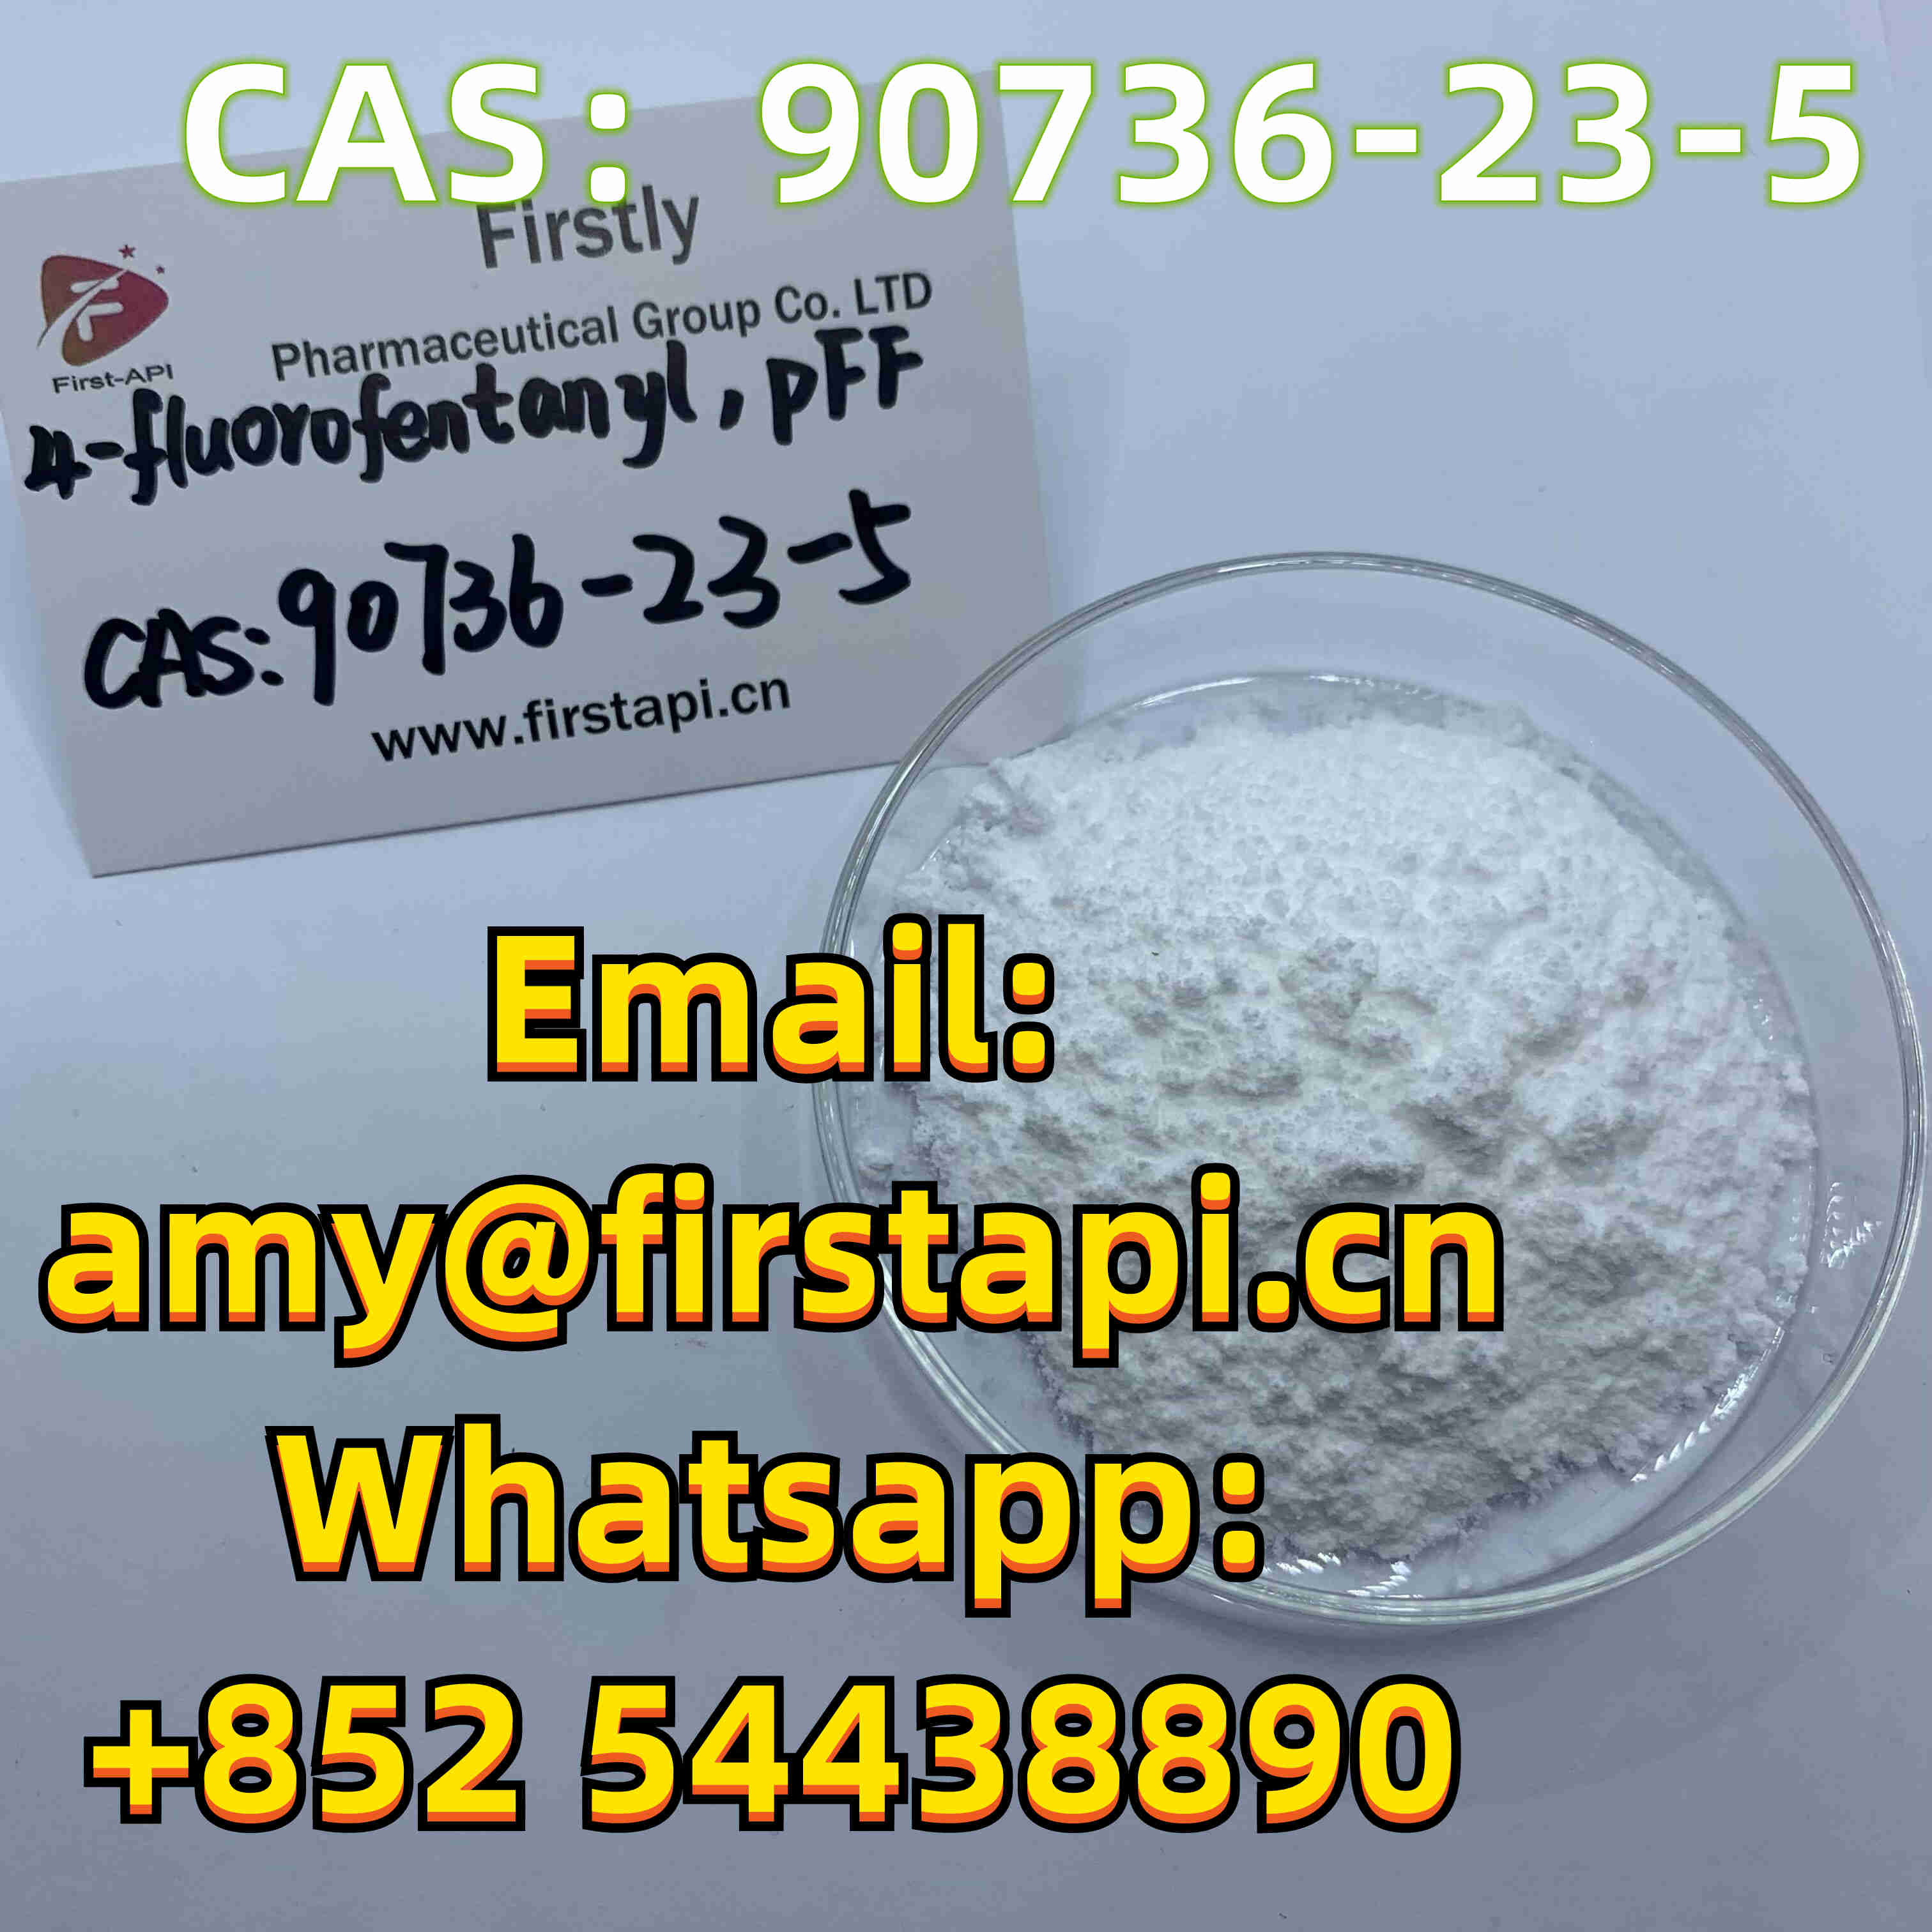 CAS No.:	90736-23-5,Whatsapp:+852 54438890,Chemical Name:	p-Fluoro Fentanyl,salable - photo